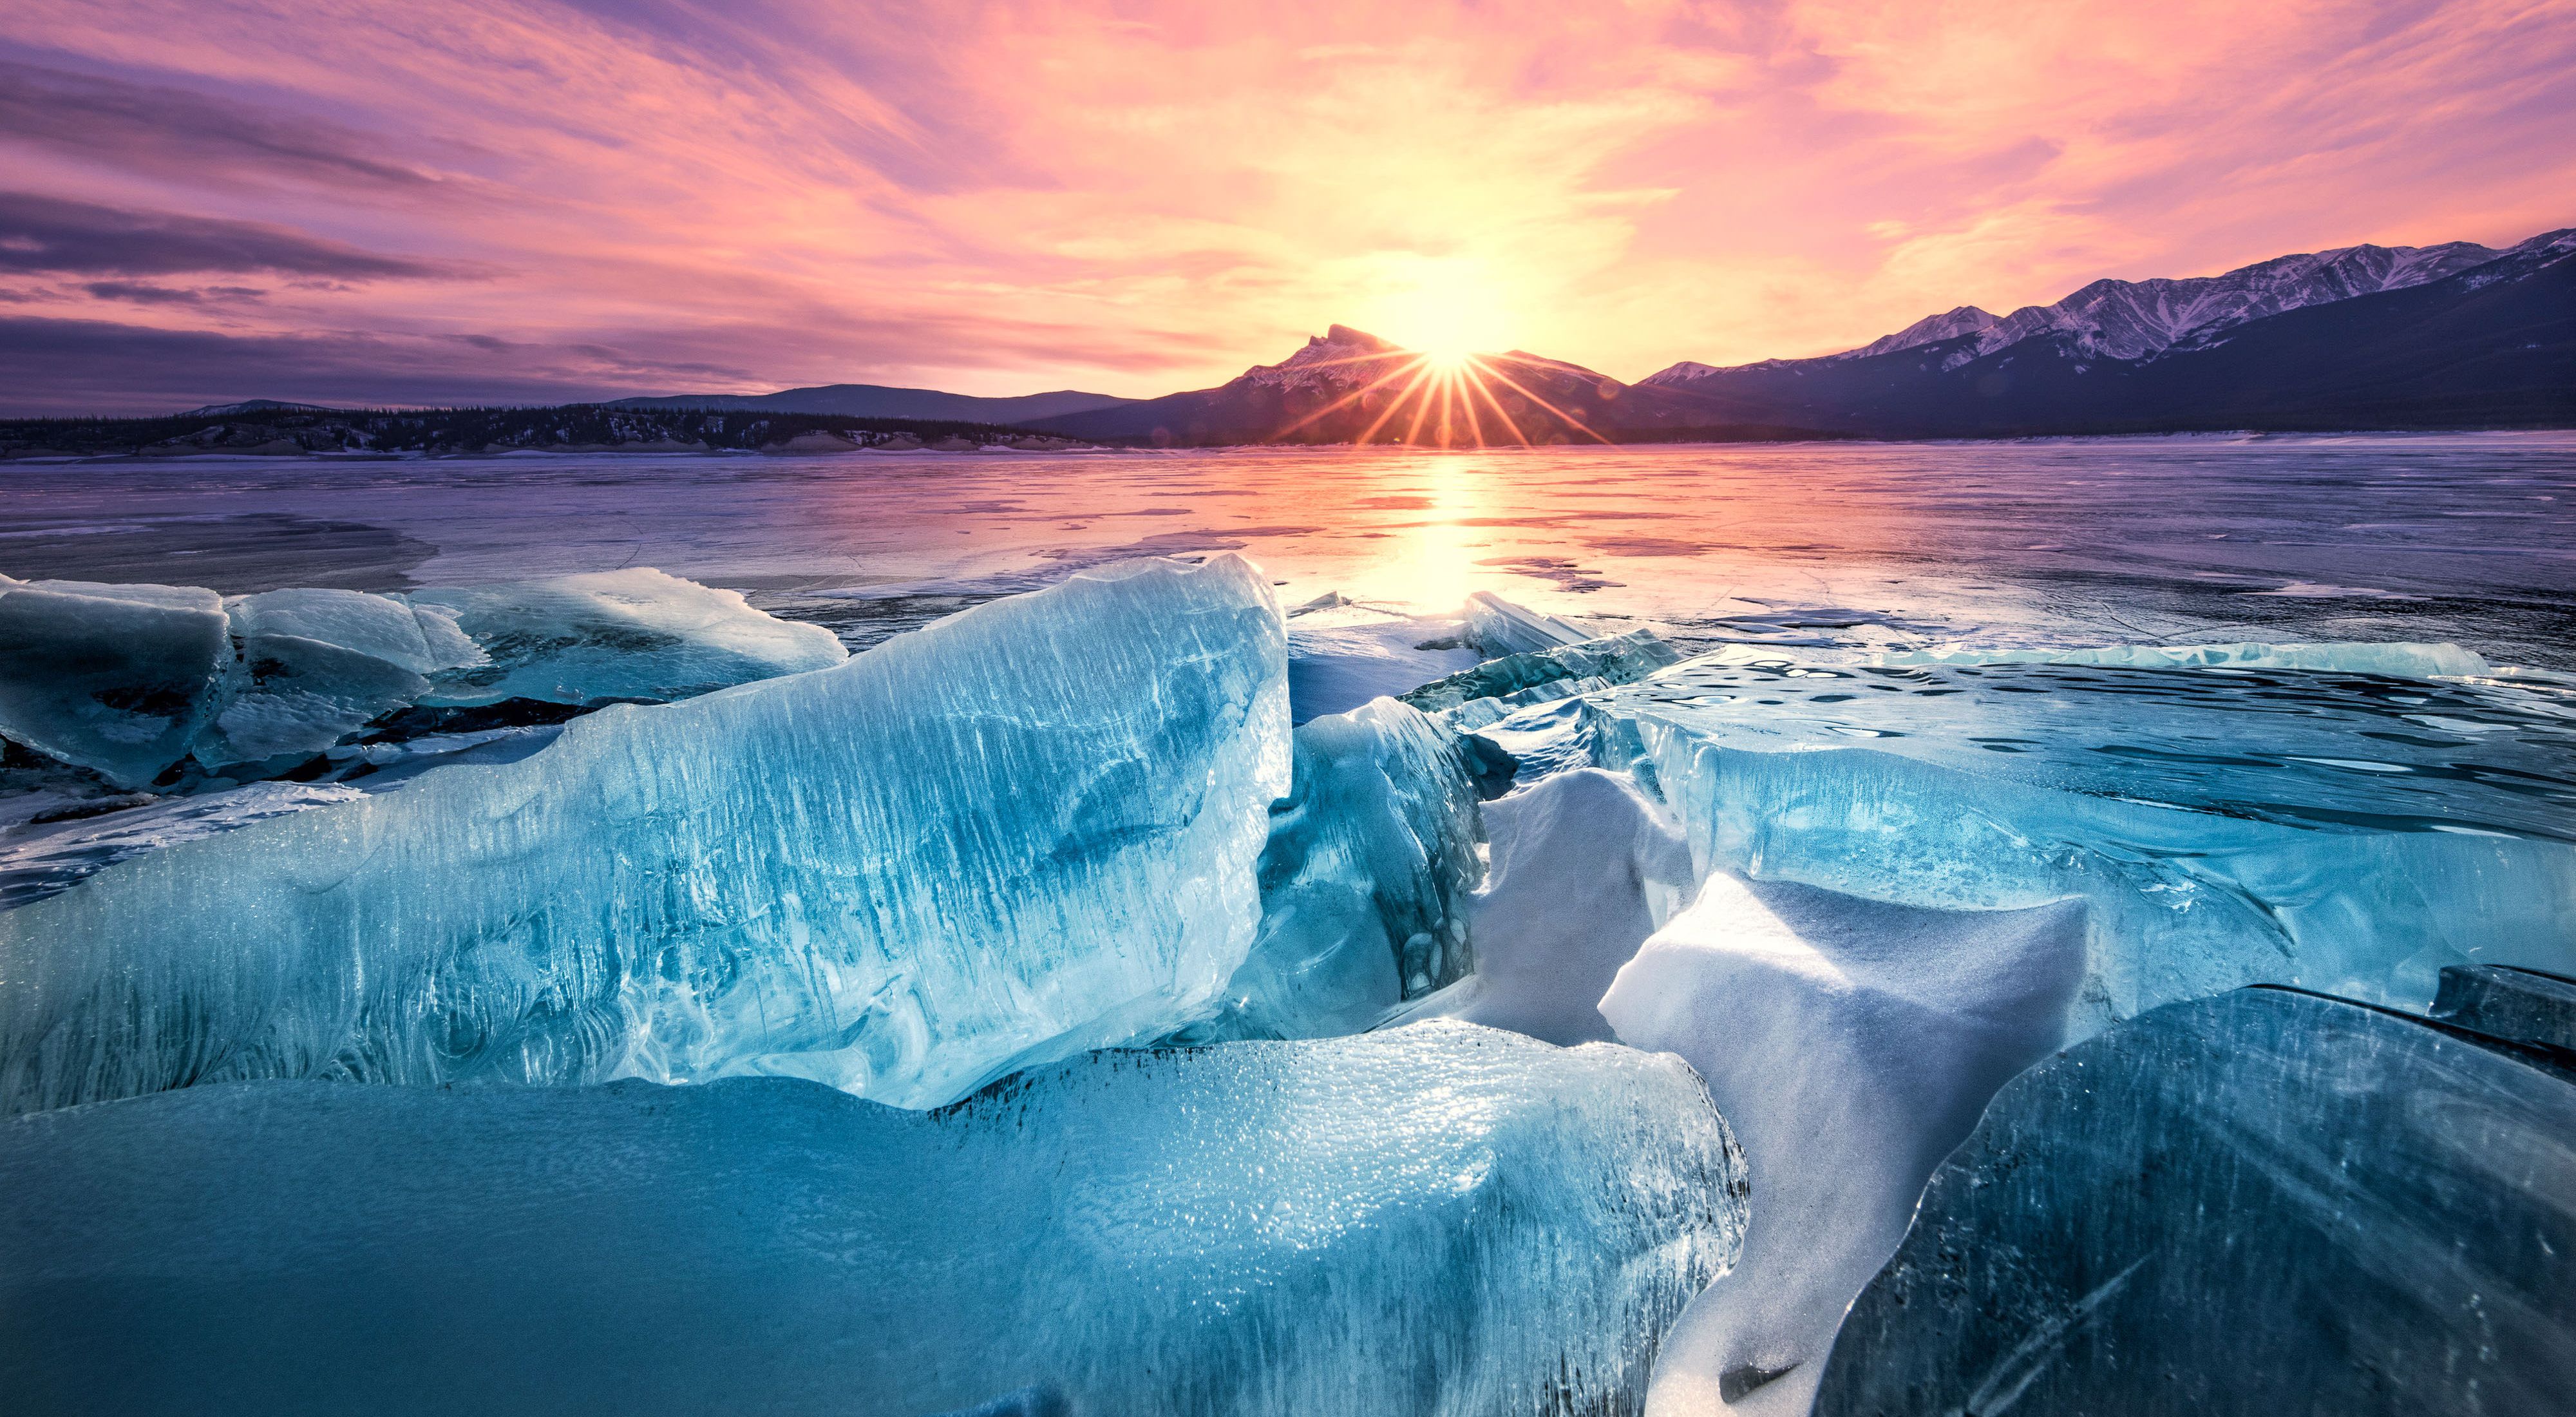 Ice breaks at dawn at Abraham Lake in Alberta, Canada. This photo was entered into The Nature Conservancy’s 2018 Photo Contest.